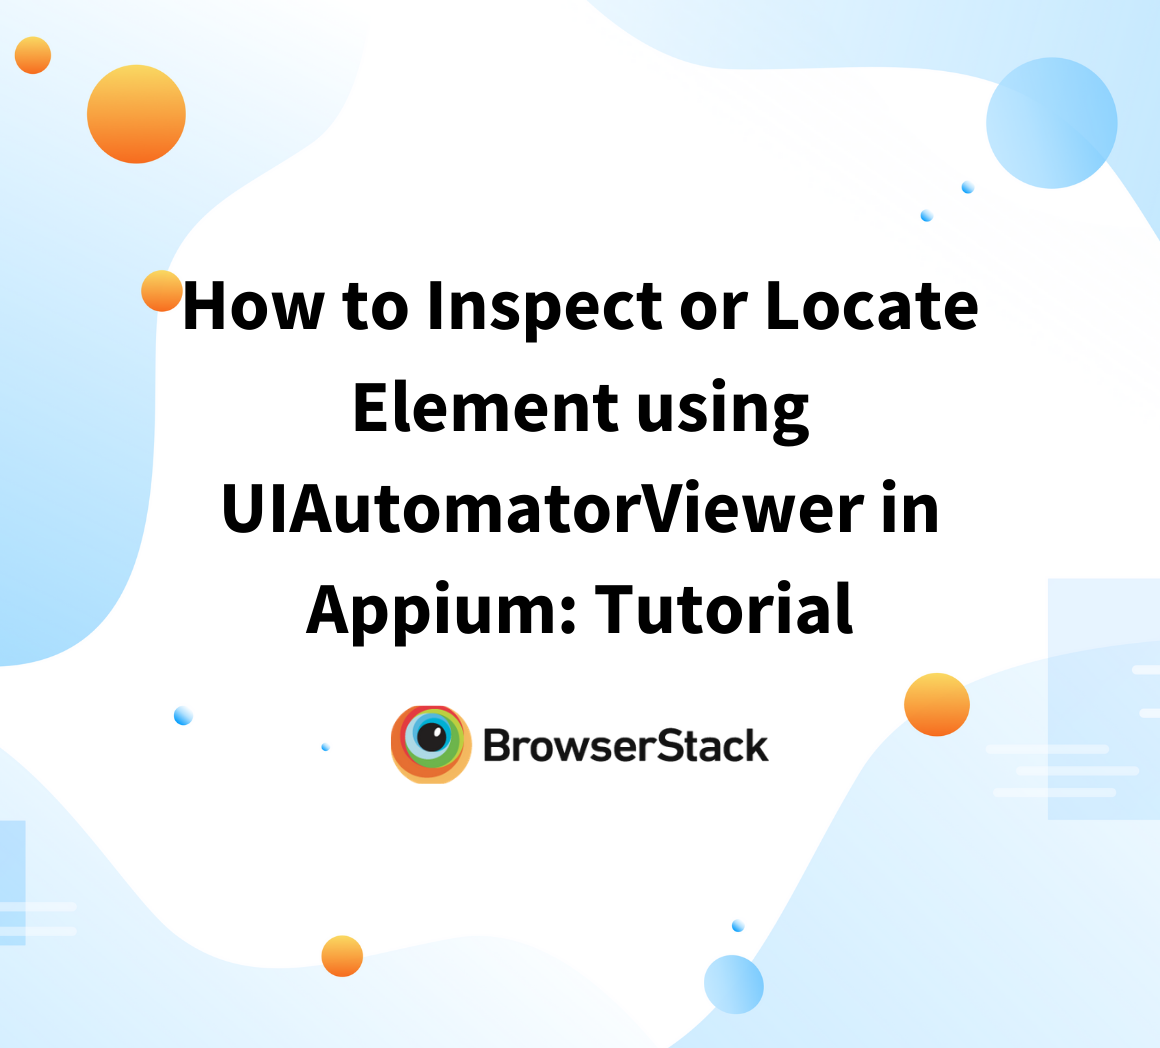 Tutorial for Inspecting and Locating Element using UIAutomatorViewer in Appium